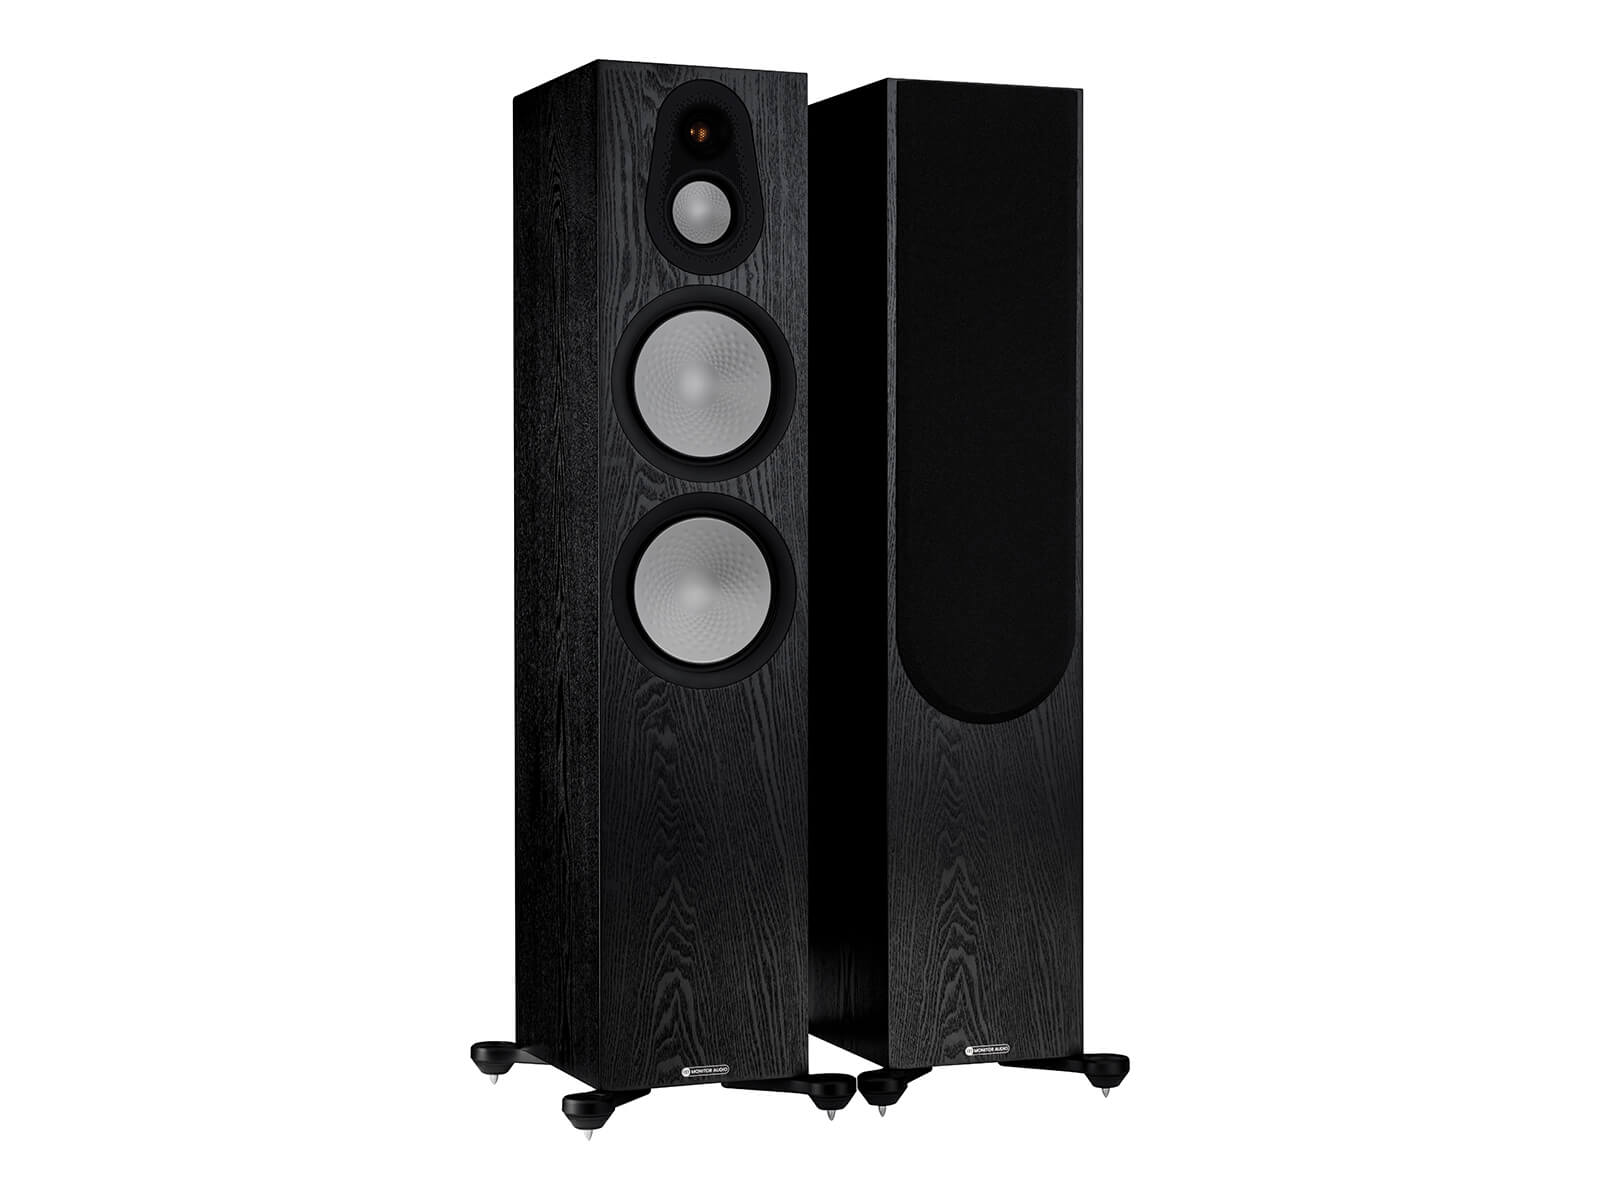 A pair of Monitor Audio's Silver 500 7G, in a black oak finish, iso view, with and without grilles.